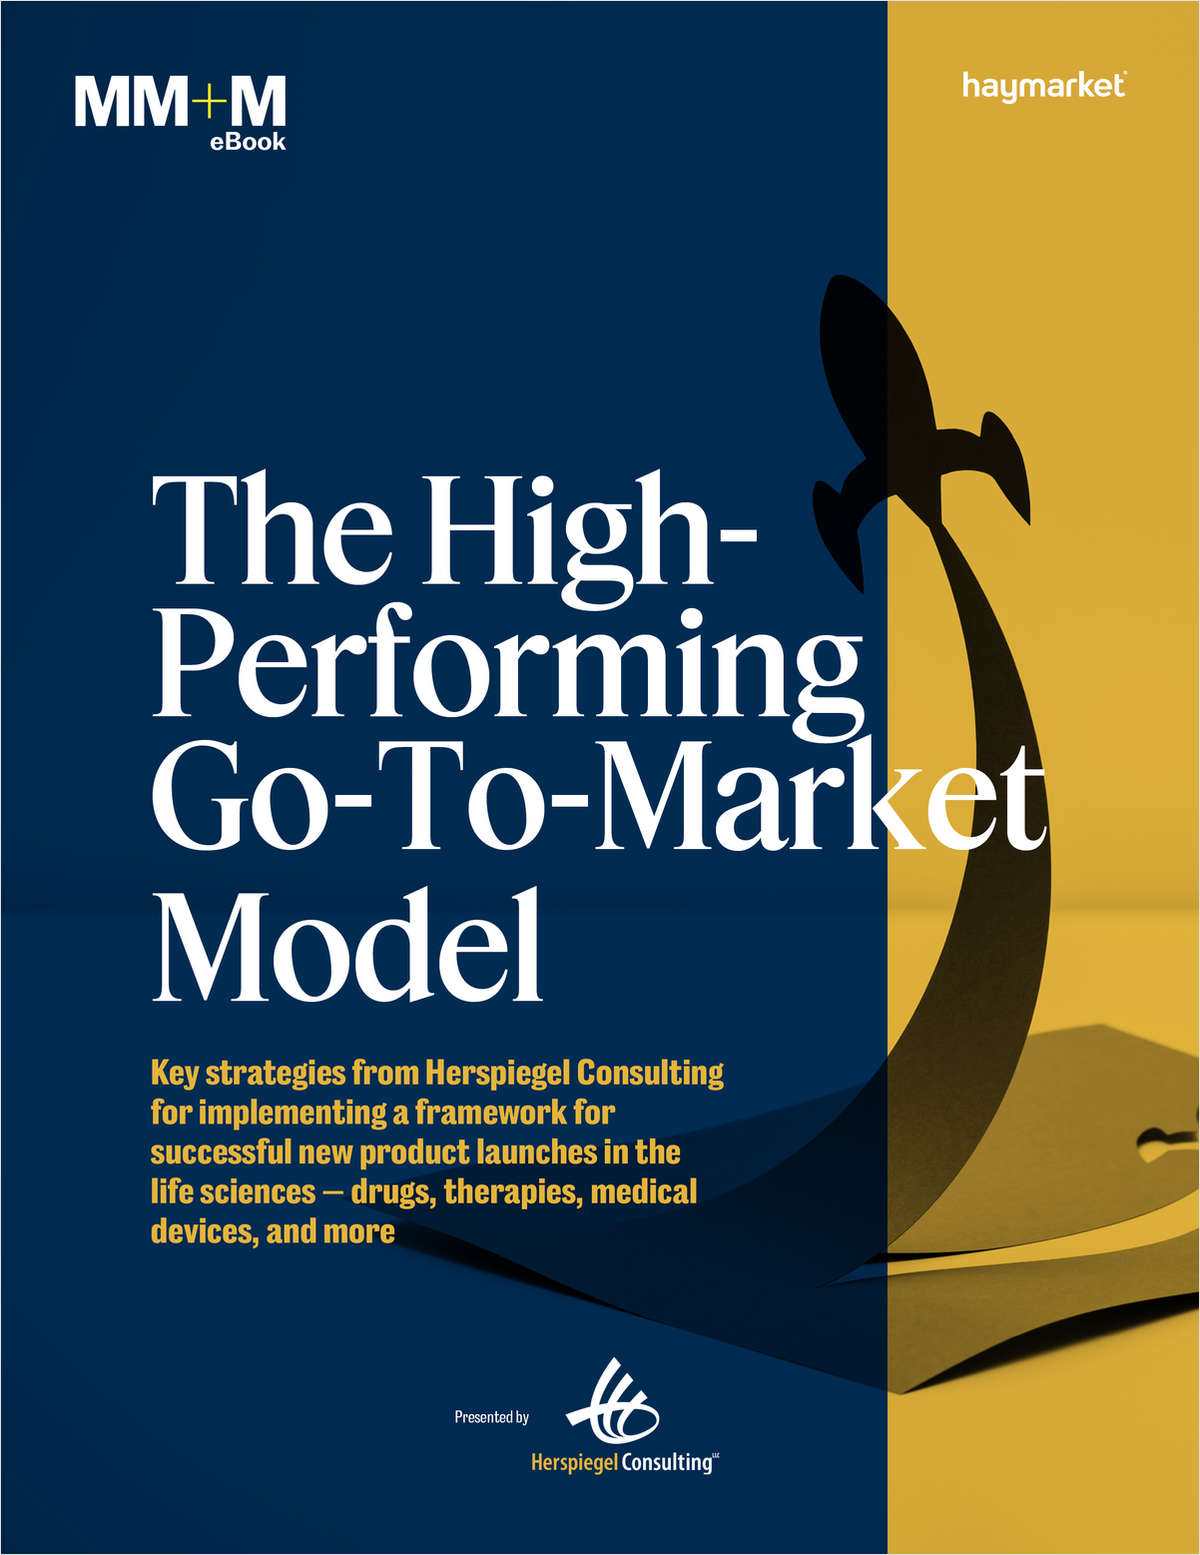 The High-Performing Go-To-Market Model